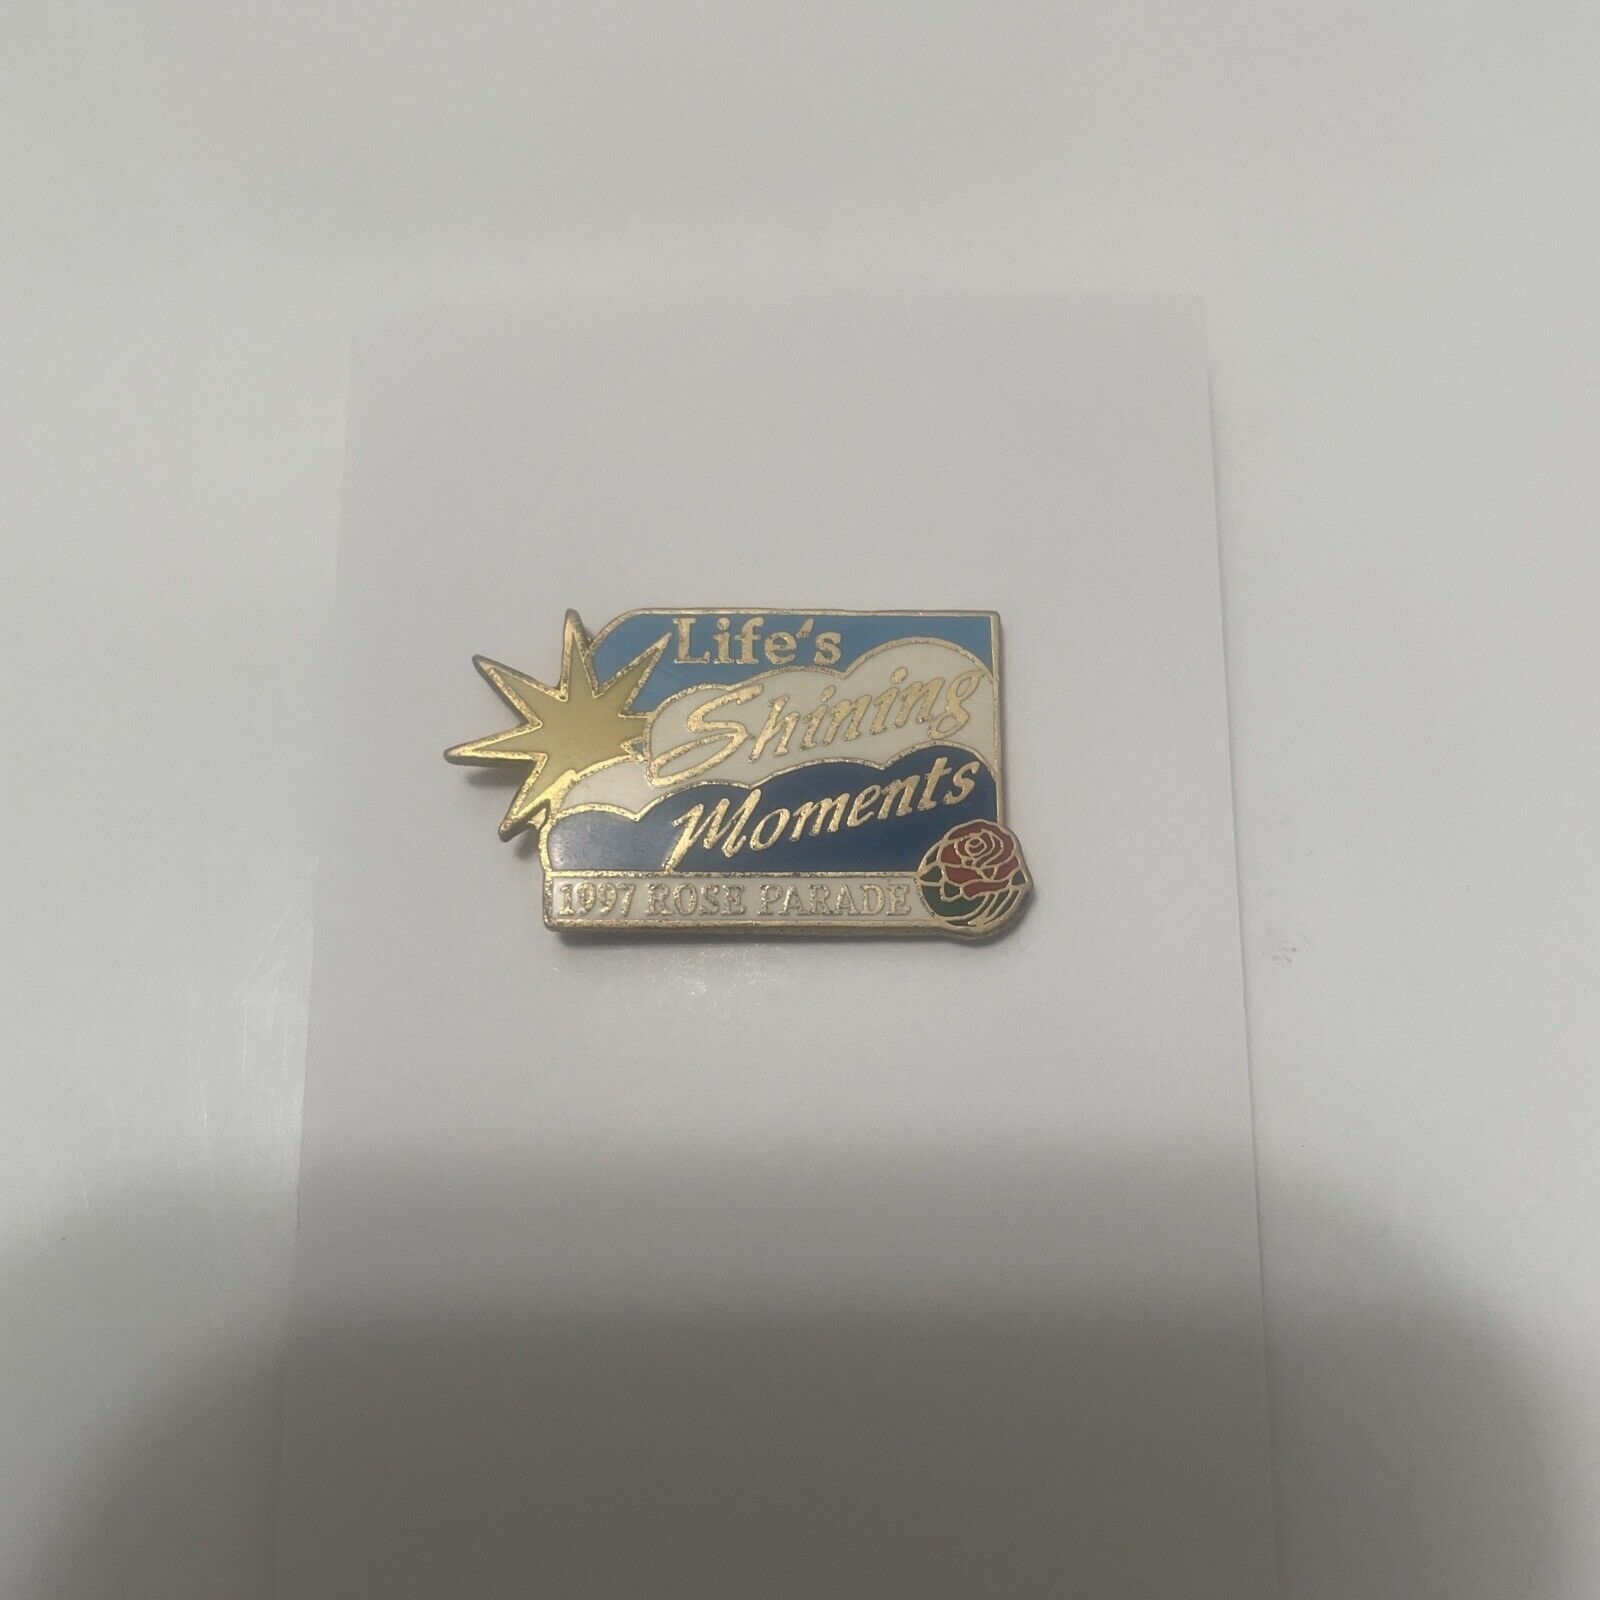 Rose Parade 1997 Lile\'s Shining Moments Lapel Pin Vintage Collectible